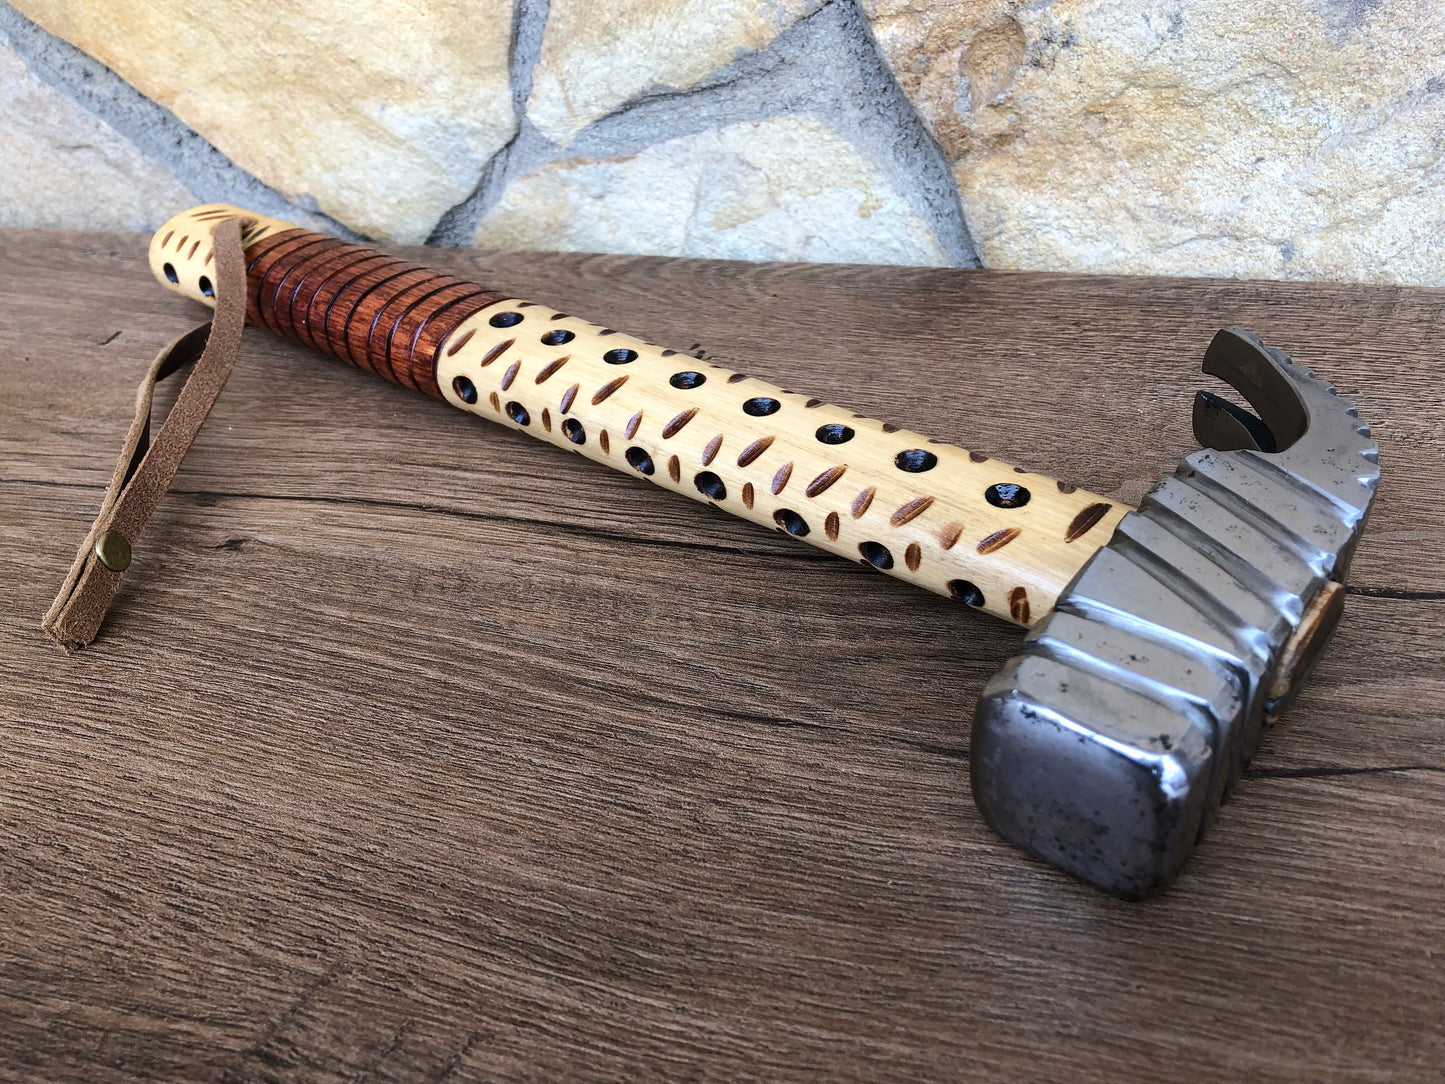 Claw hammer, hand crafted carpenter's claw hammer, hammer, hand crafted hammer, custom hammer, personalized hammer, engraved hammer, tools